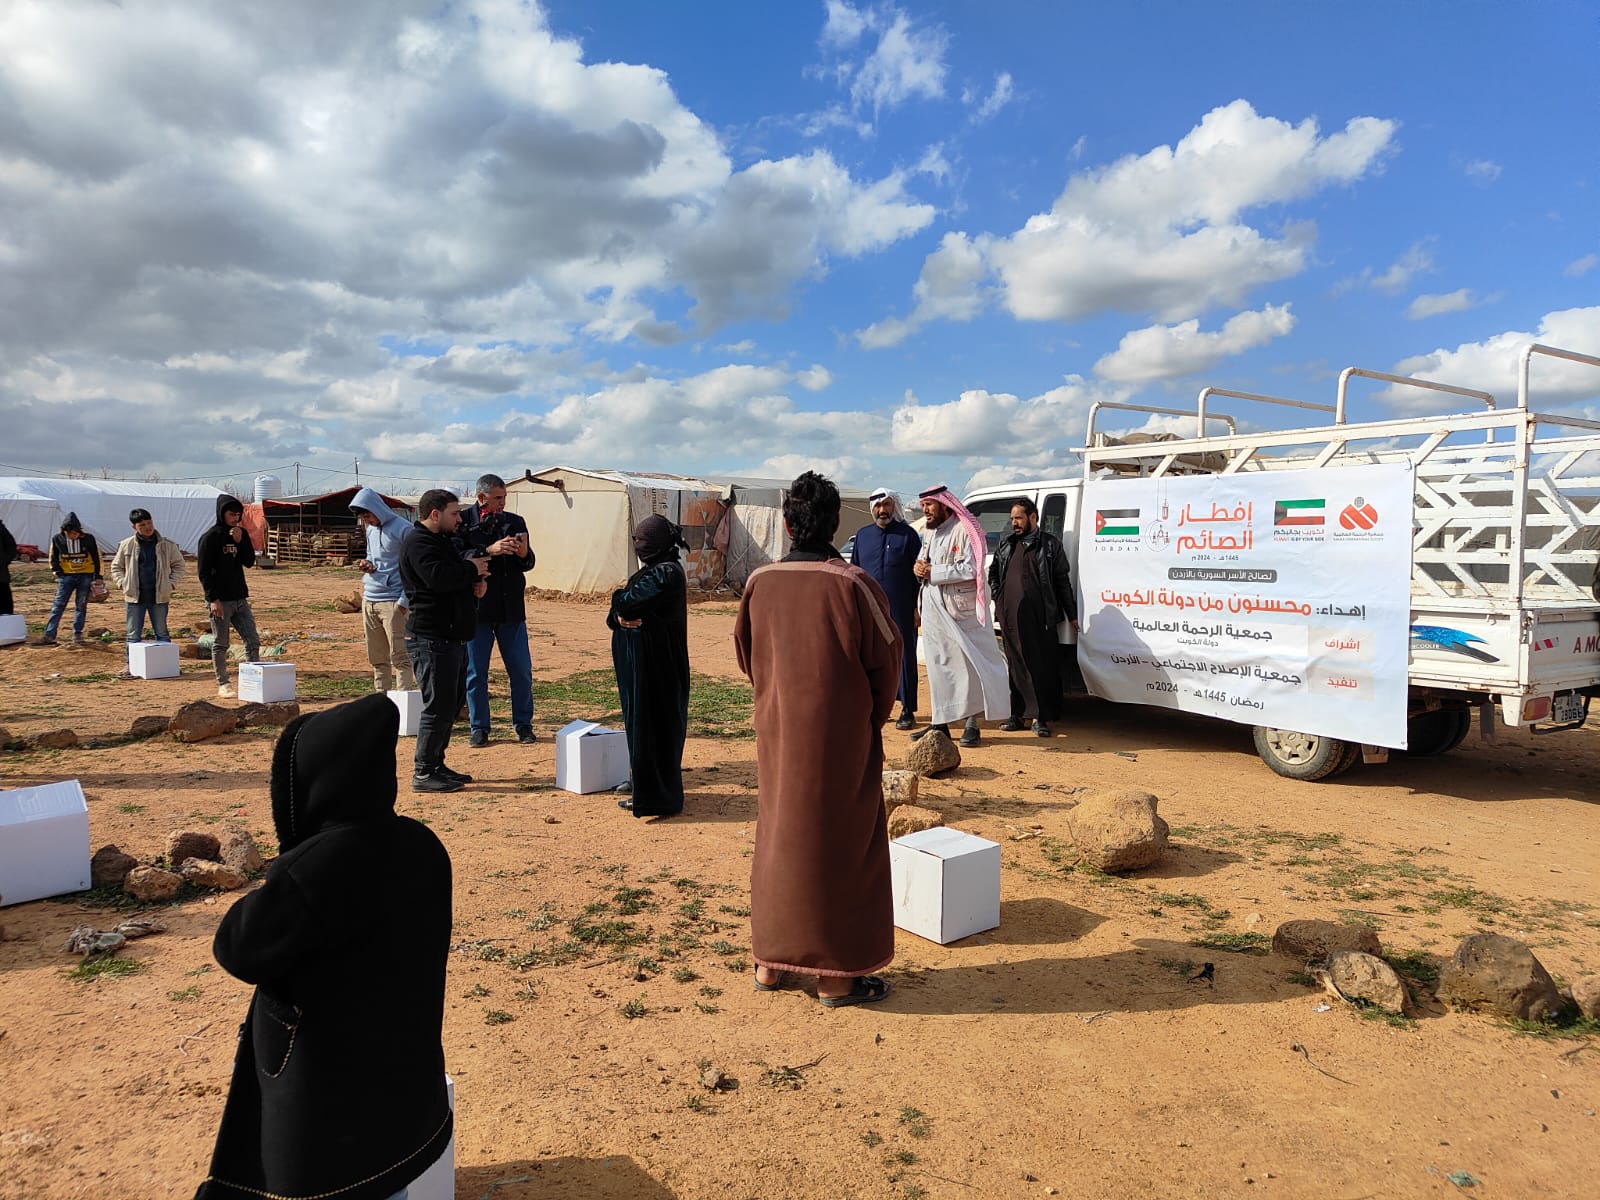 Charity organizations facilitate effective distribution of aid